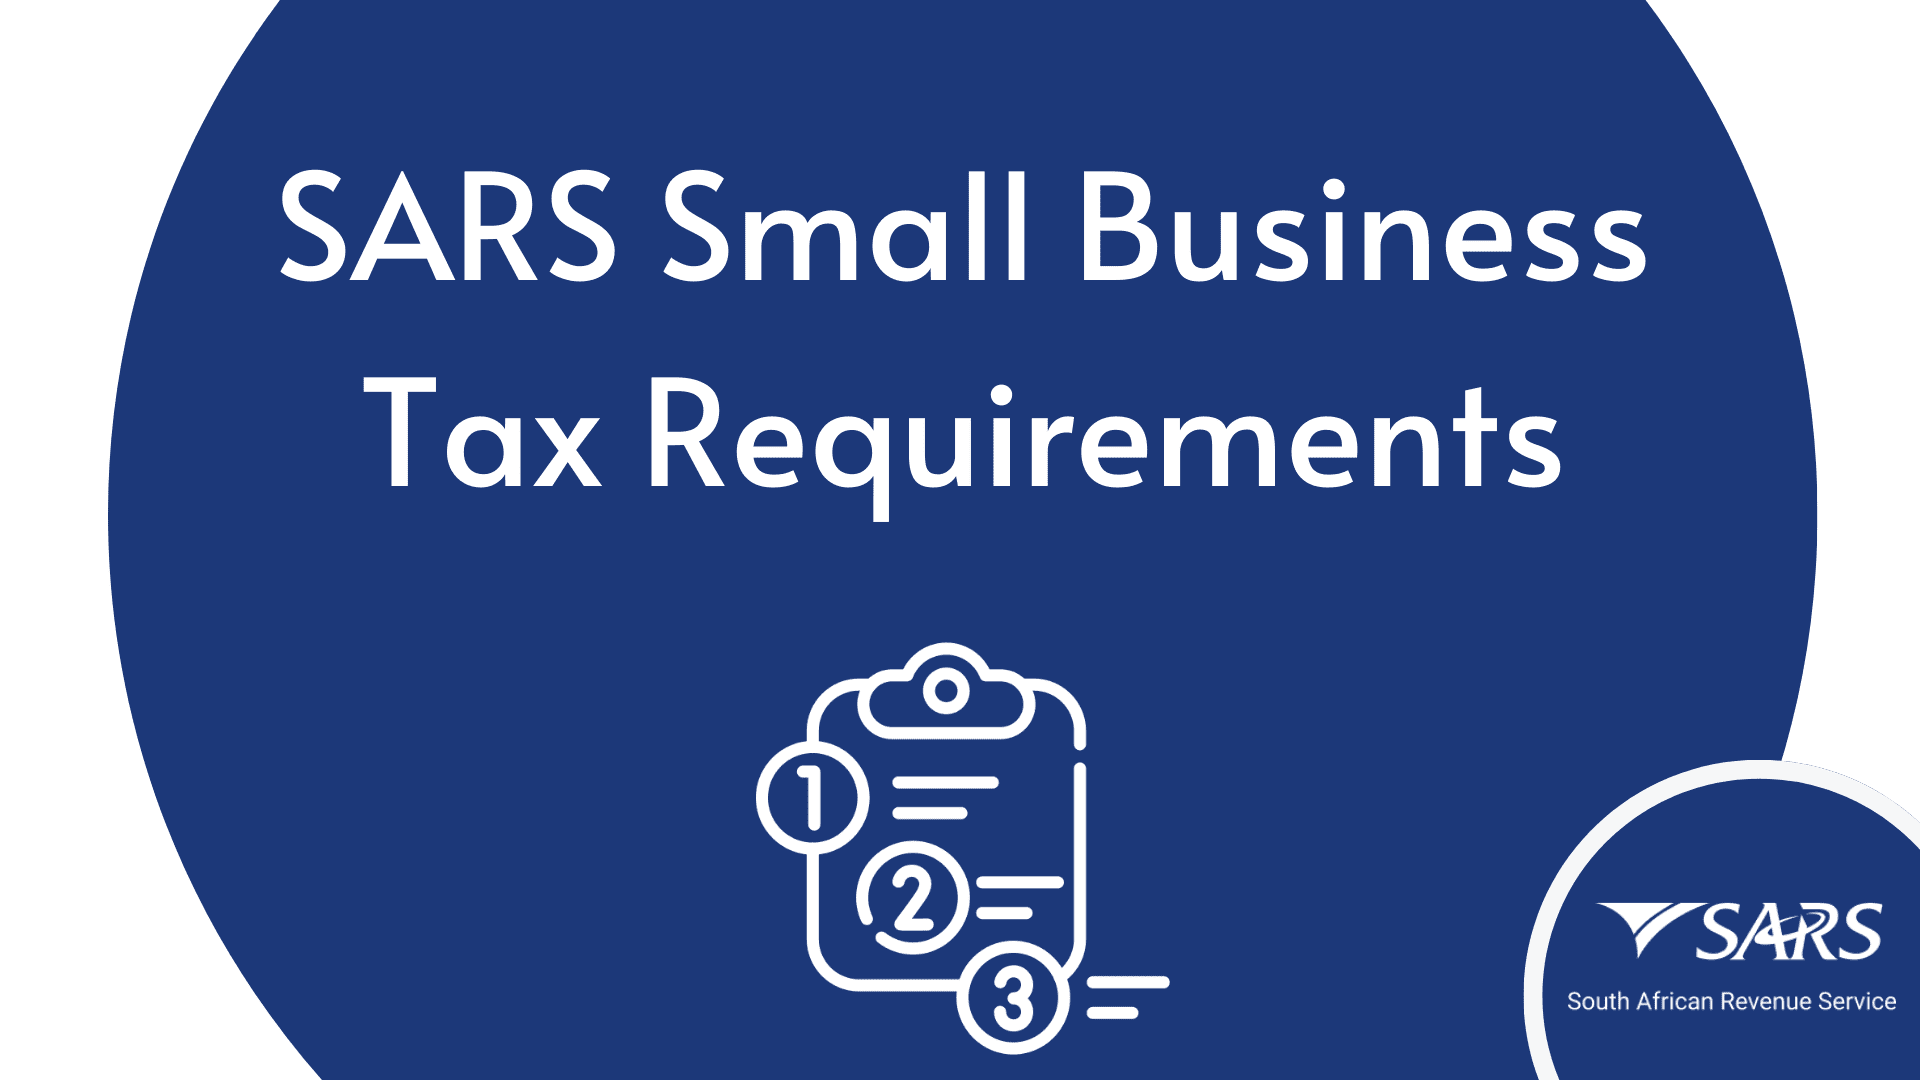 SARS Small Business Tax Requirements